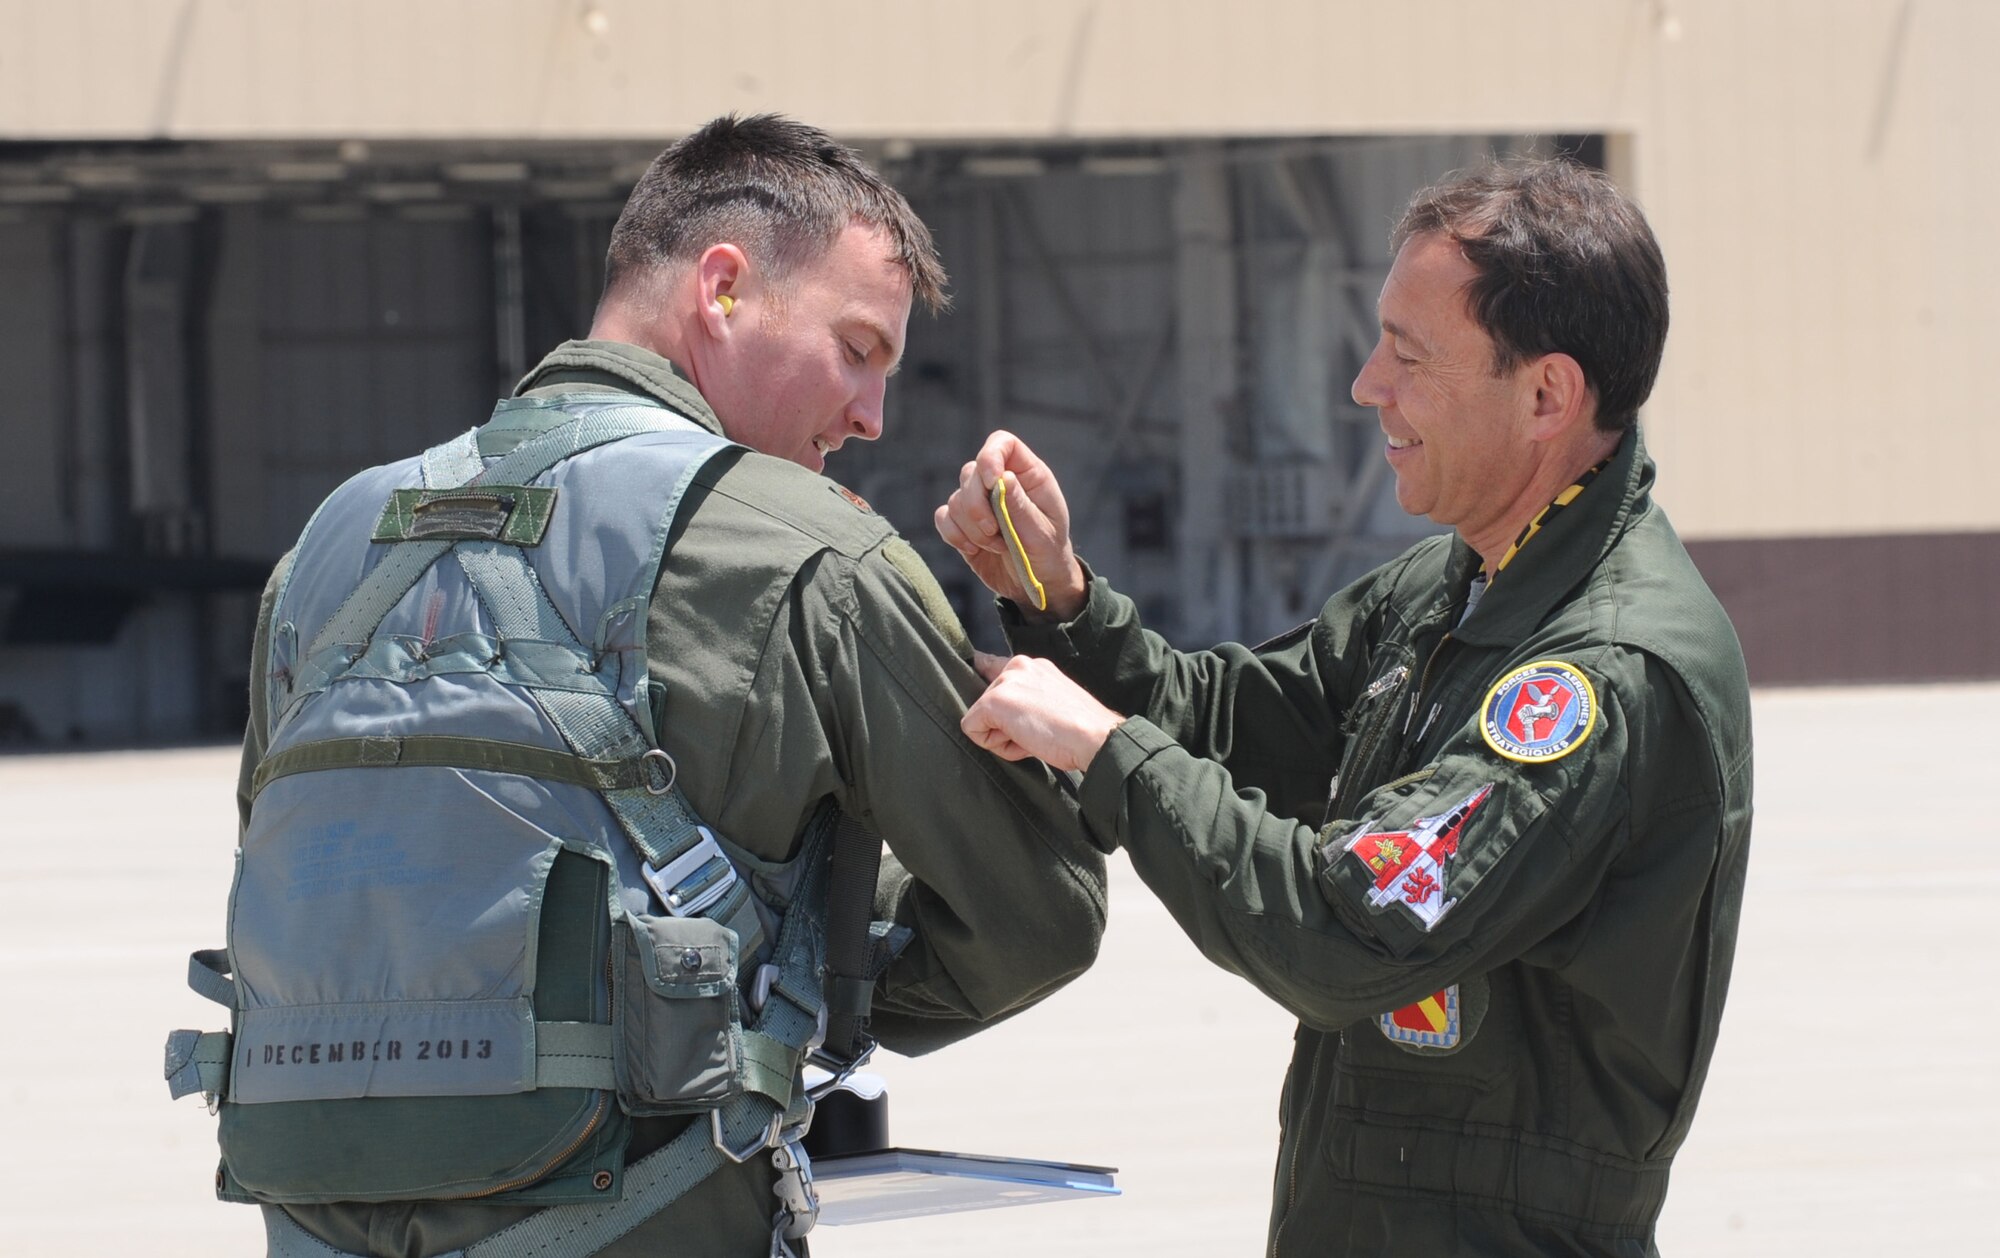 Lt. Gen. Philippe Steininger, commander of the French Air Force’s Strategic Air Forces Command, places his unit patch on U.S. Air Force Maj. Alexander Reich, 394th Combat Training Squadron B-2 instructor pilot, at Whiteman Air Force Base, Mo., May 27, 2015. The U.S. and France have been long-time allies, joining forces in many conflicts throughout history, and Steininger’s visit is part of a regular series of exchanges between the two nations’ strategic air forces. .  (U.S. Air Force photo by Staff Sgt. Alexandra M. Longfellow/Released)